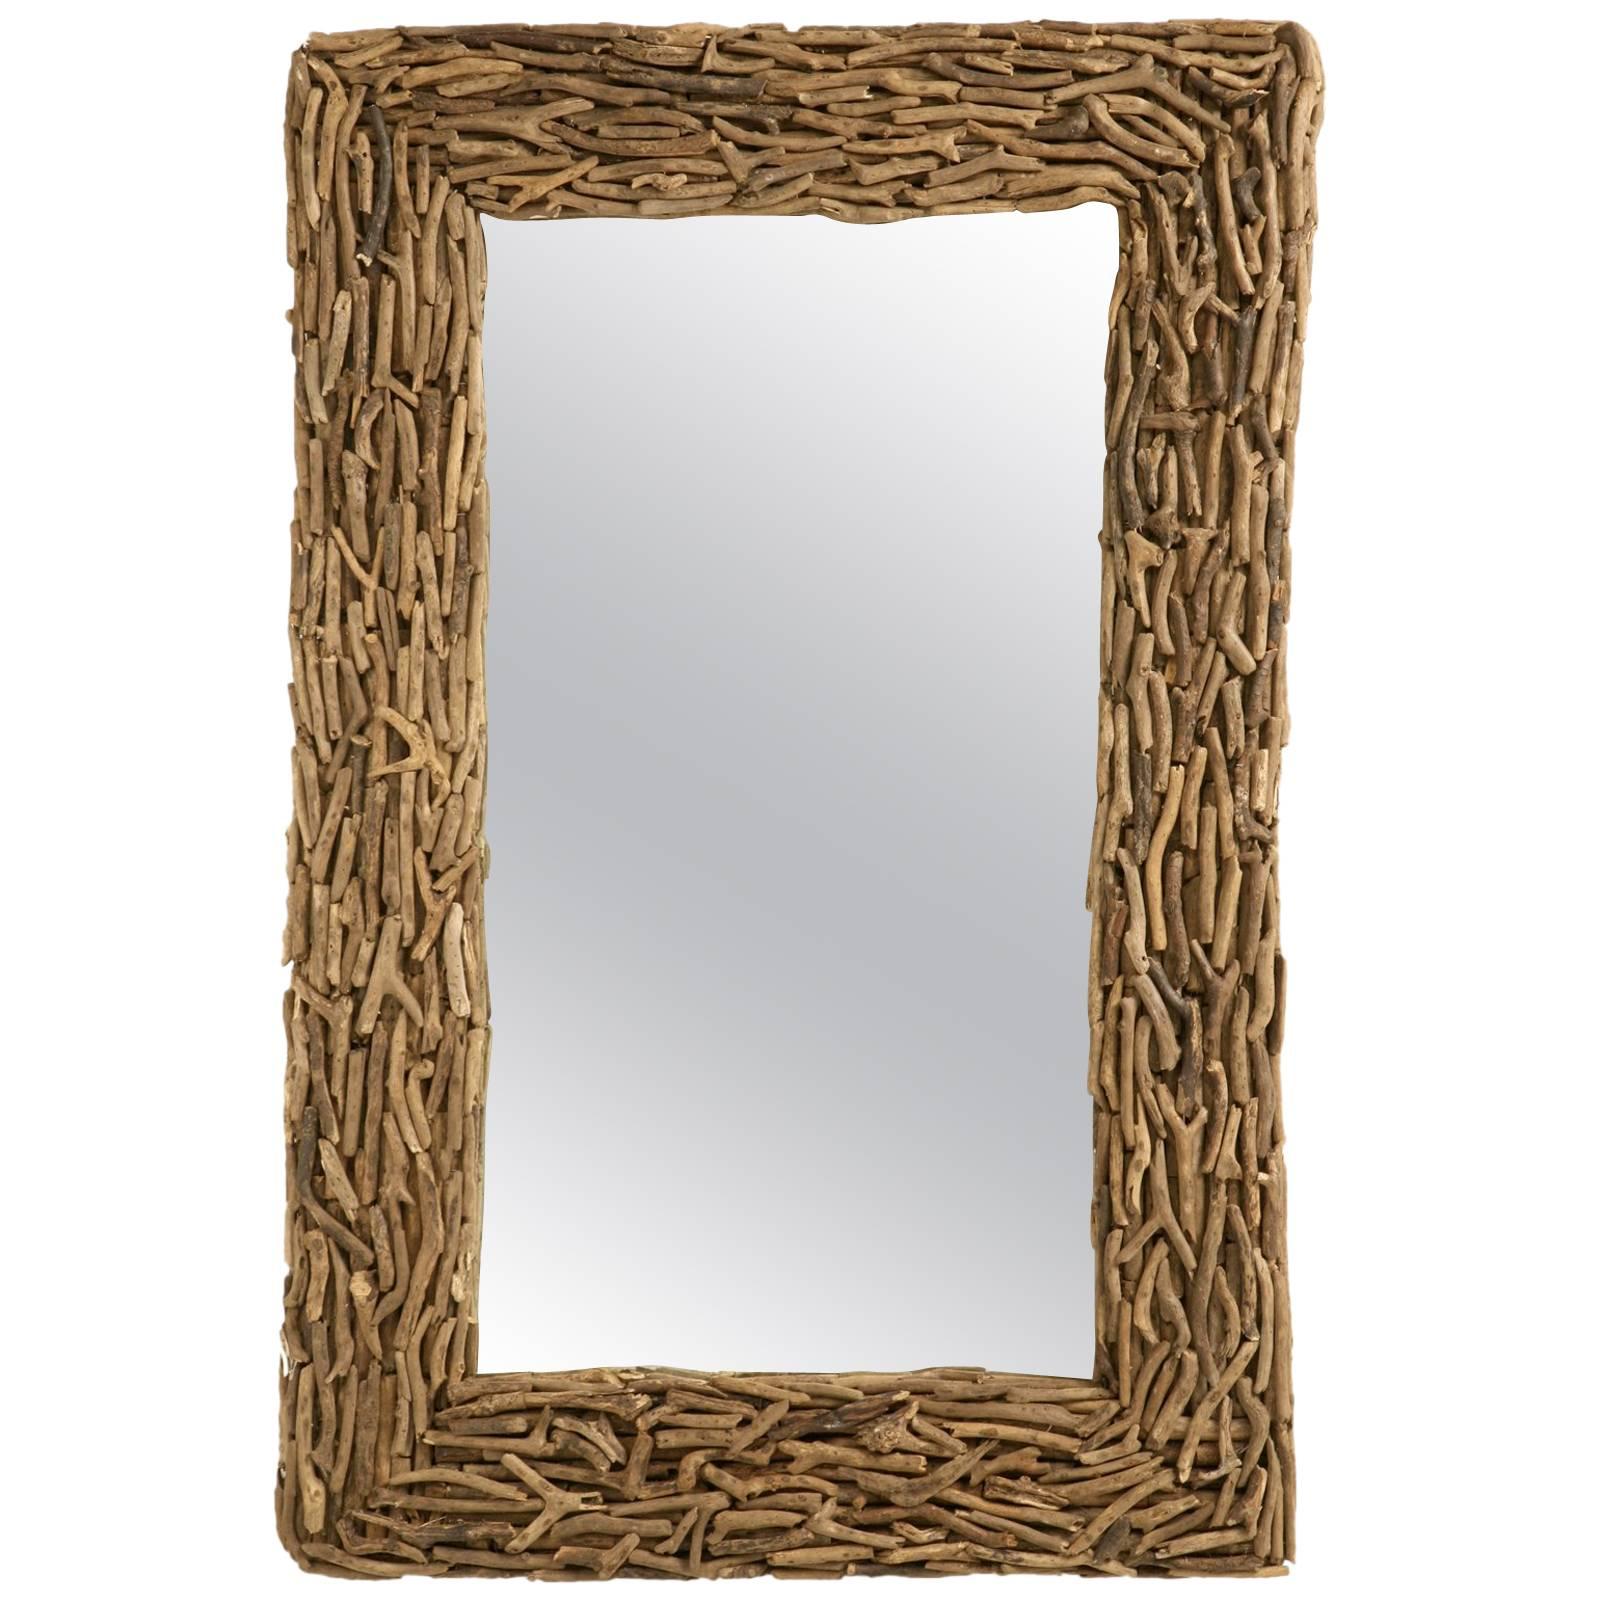 Large Driftwood Mirror Imported from England with a Beachy Feel